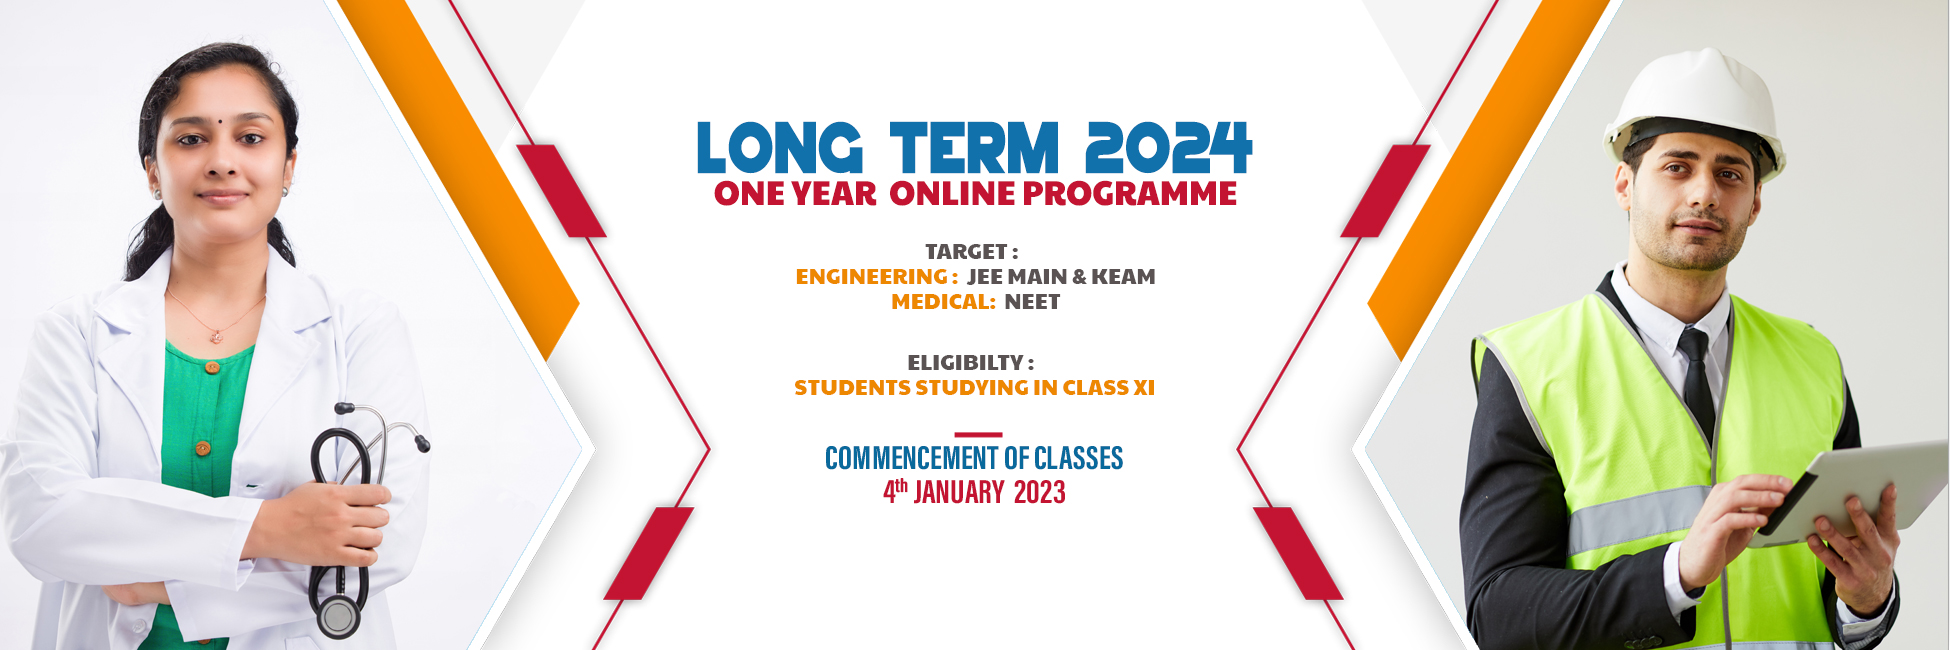 LONG-TERM-2024-ONE-YEAR